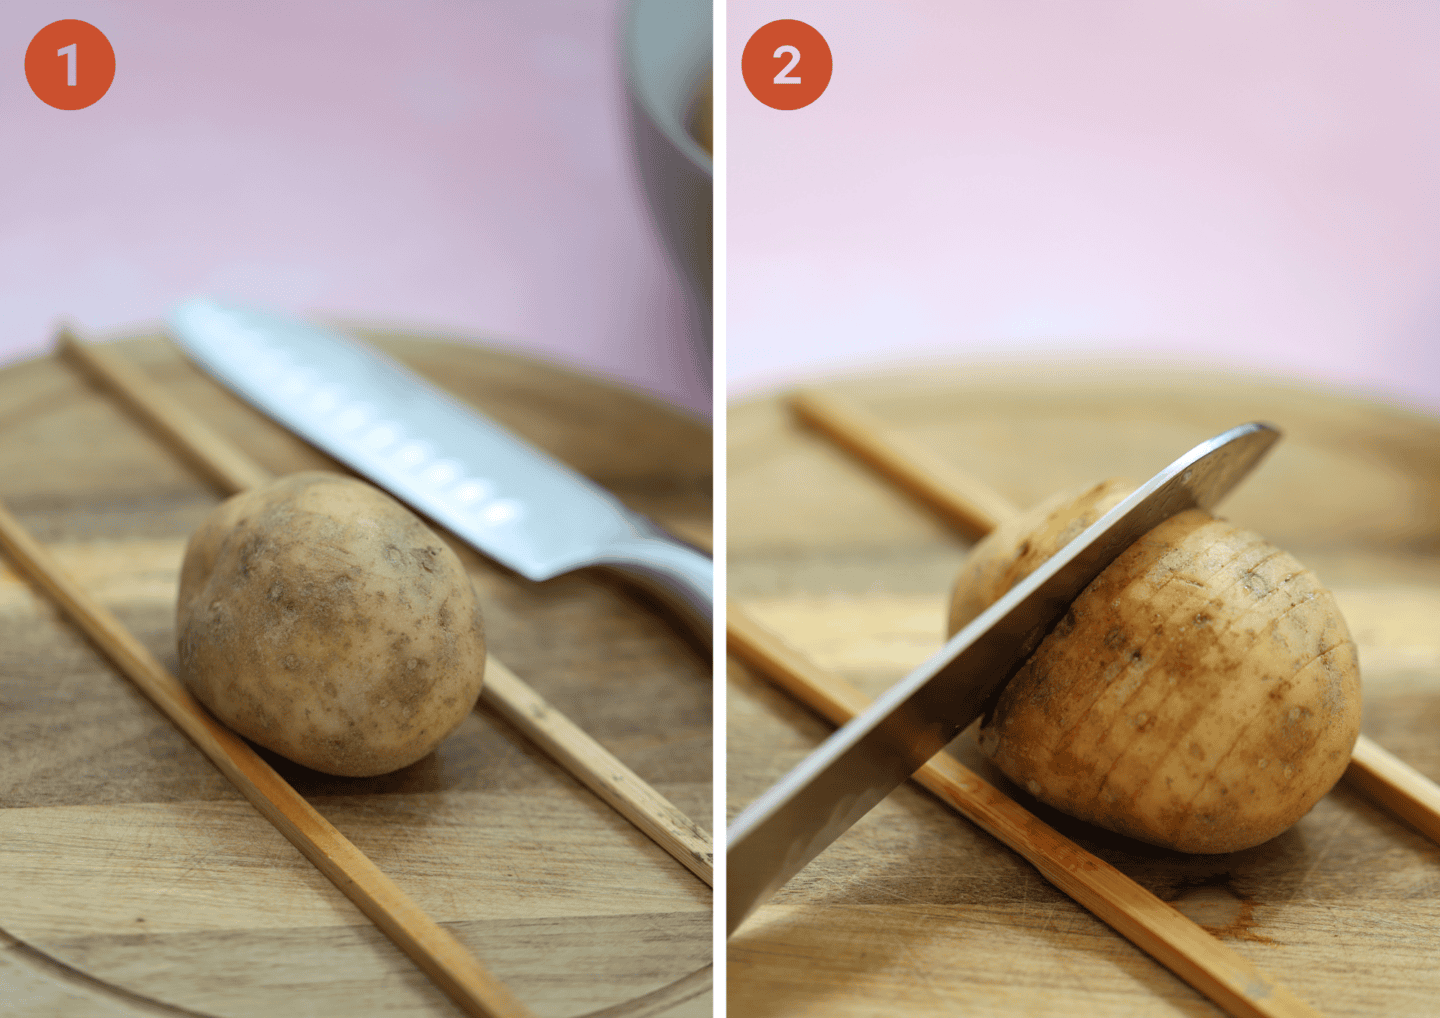 Use two chopsticks to cut the hasselback potatoes.